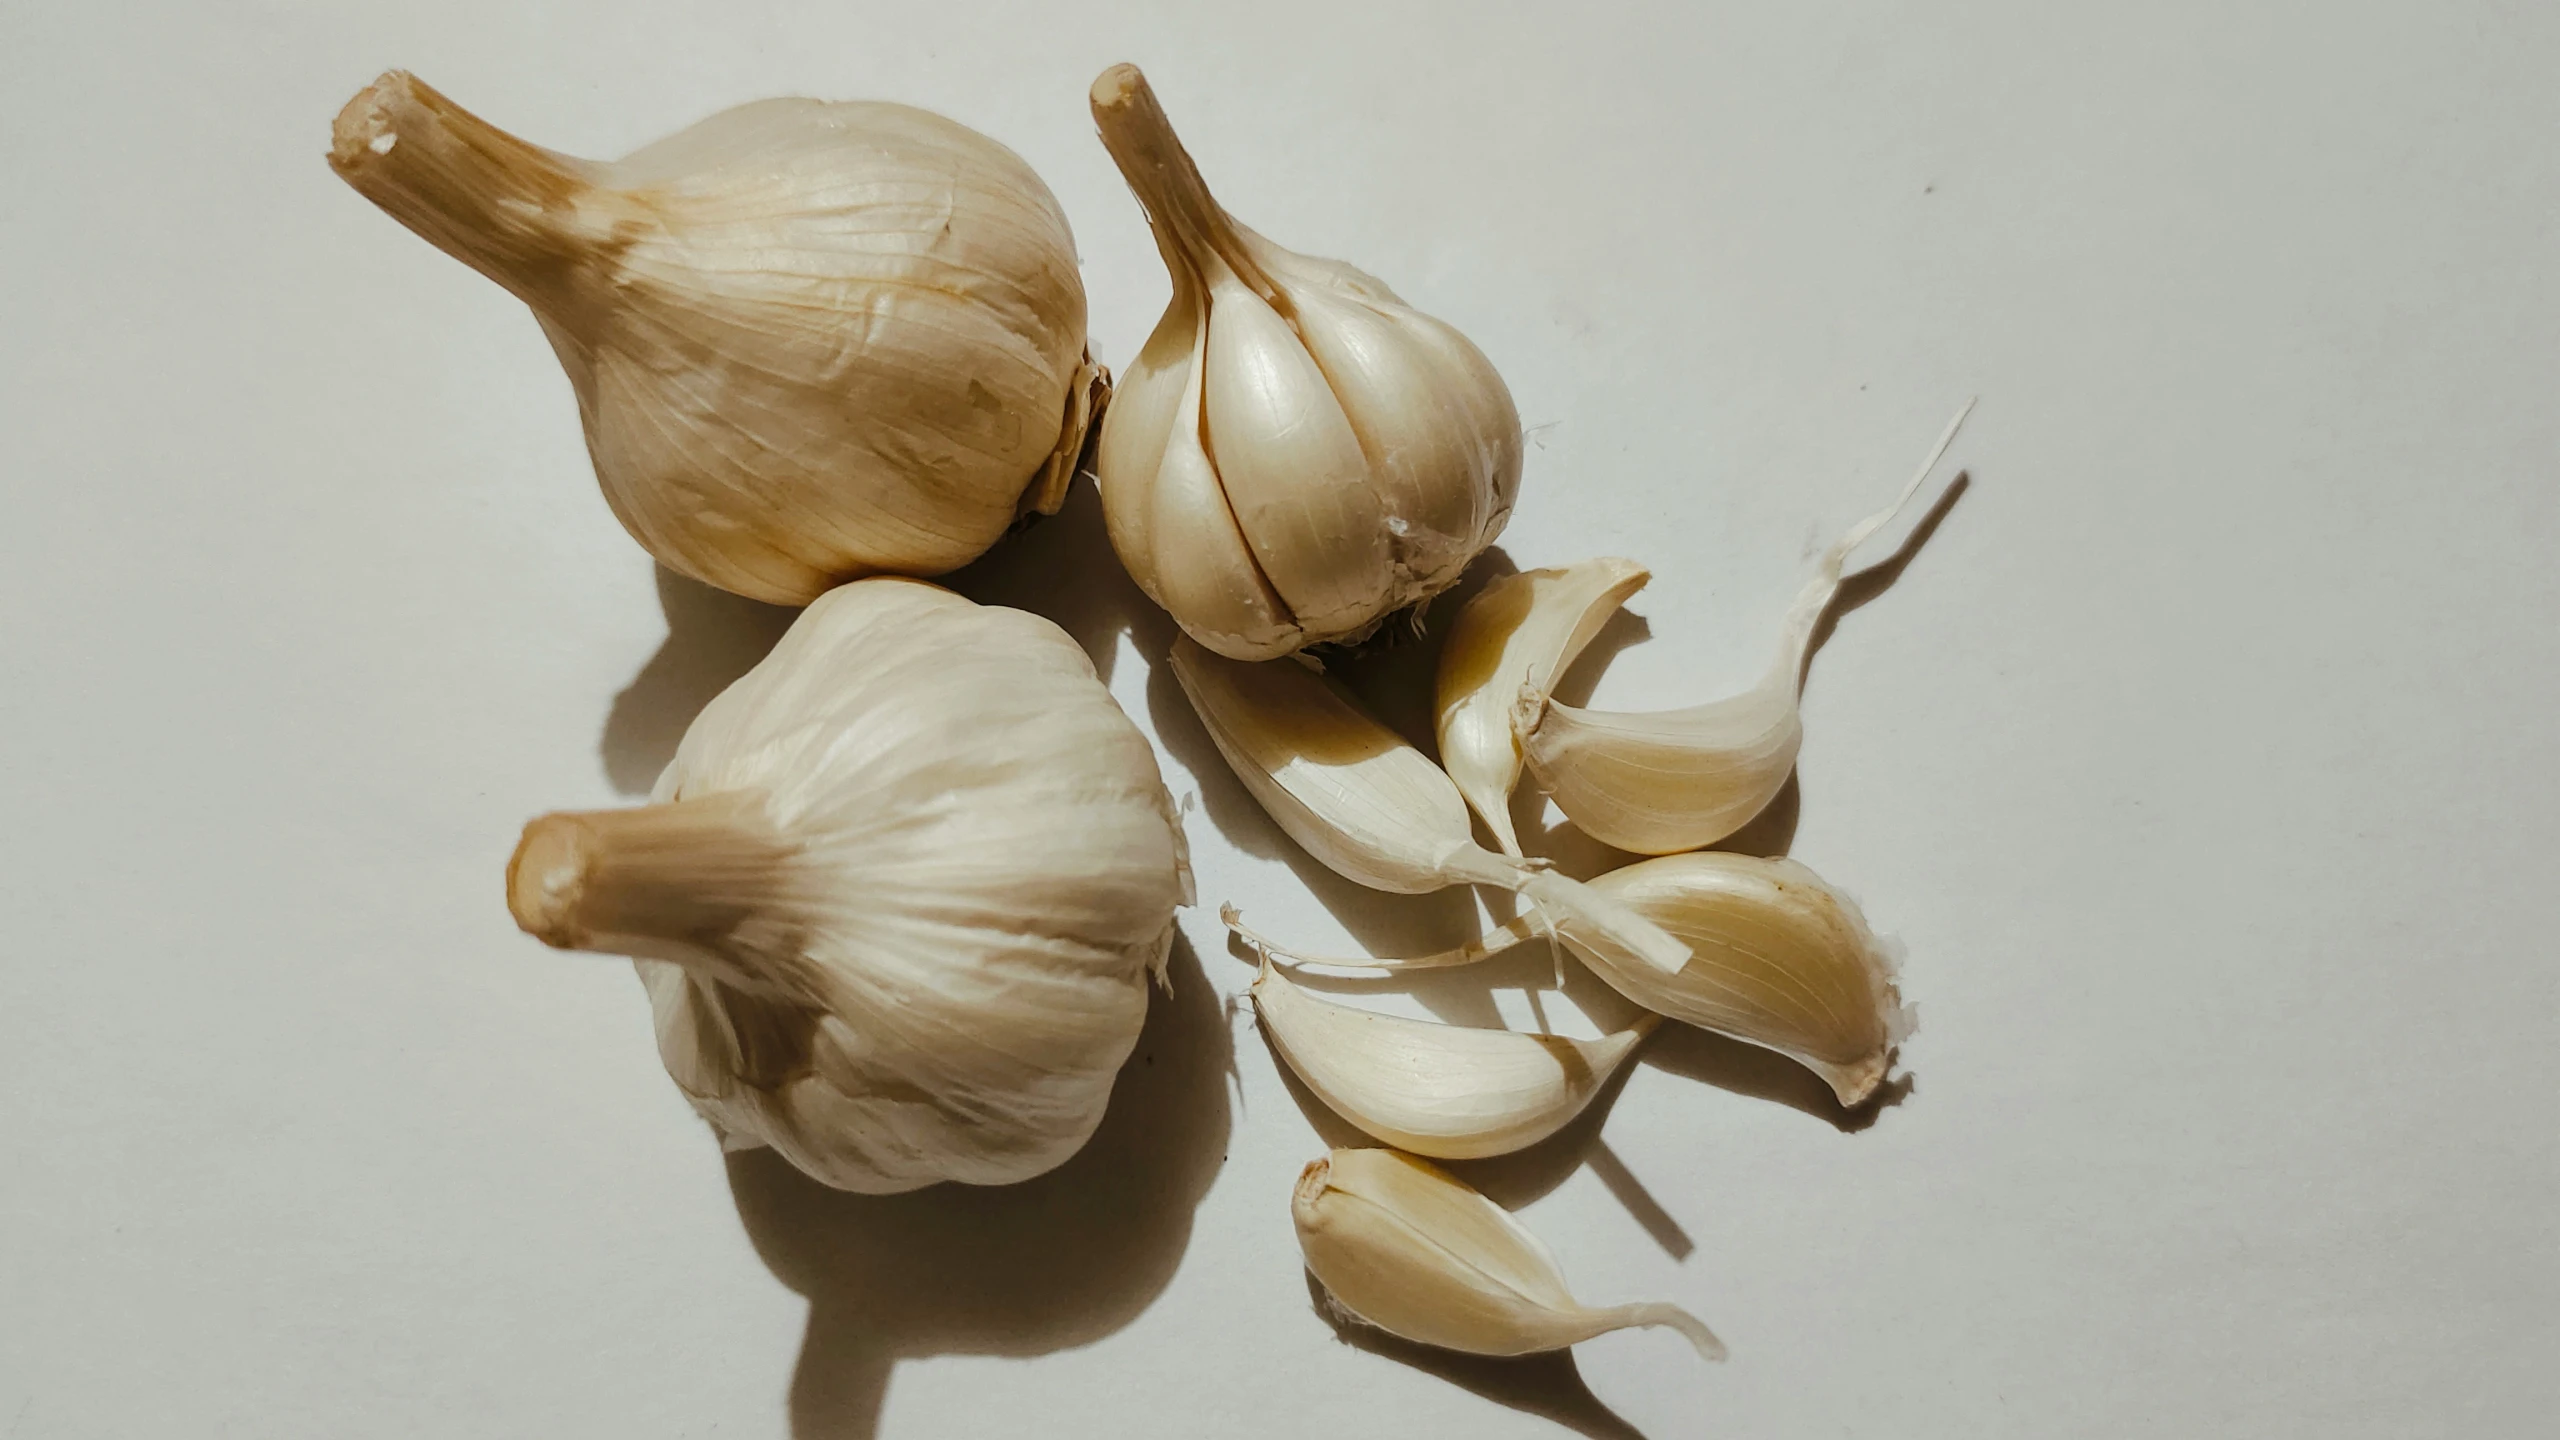 garlic and clump of fresh garlic on a white surface